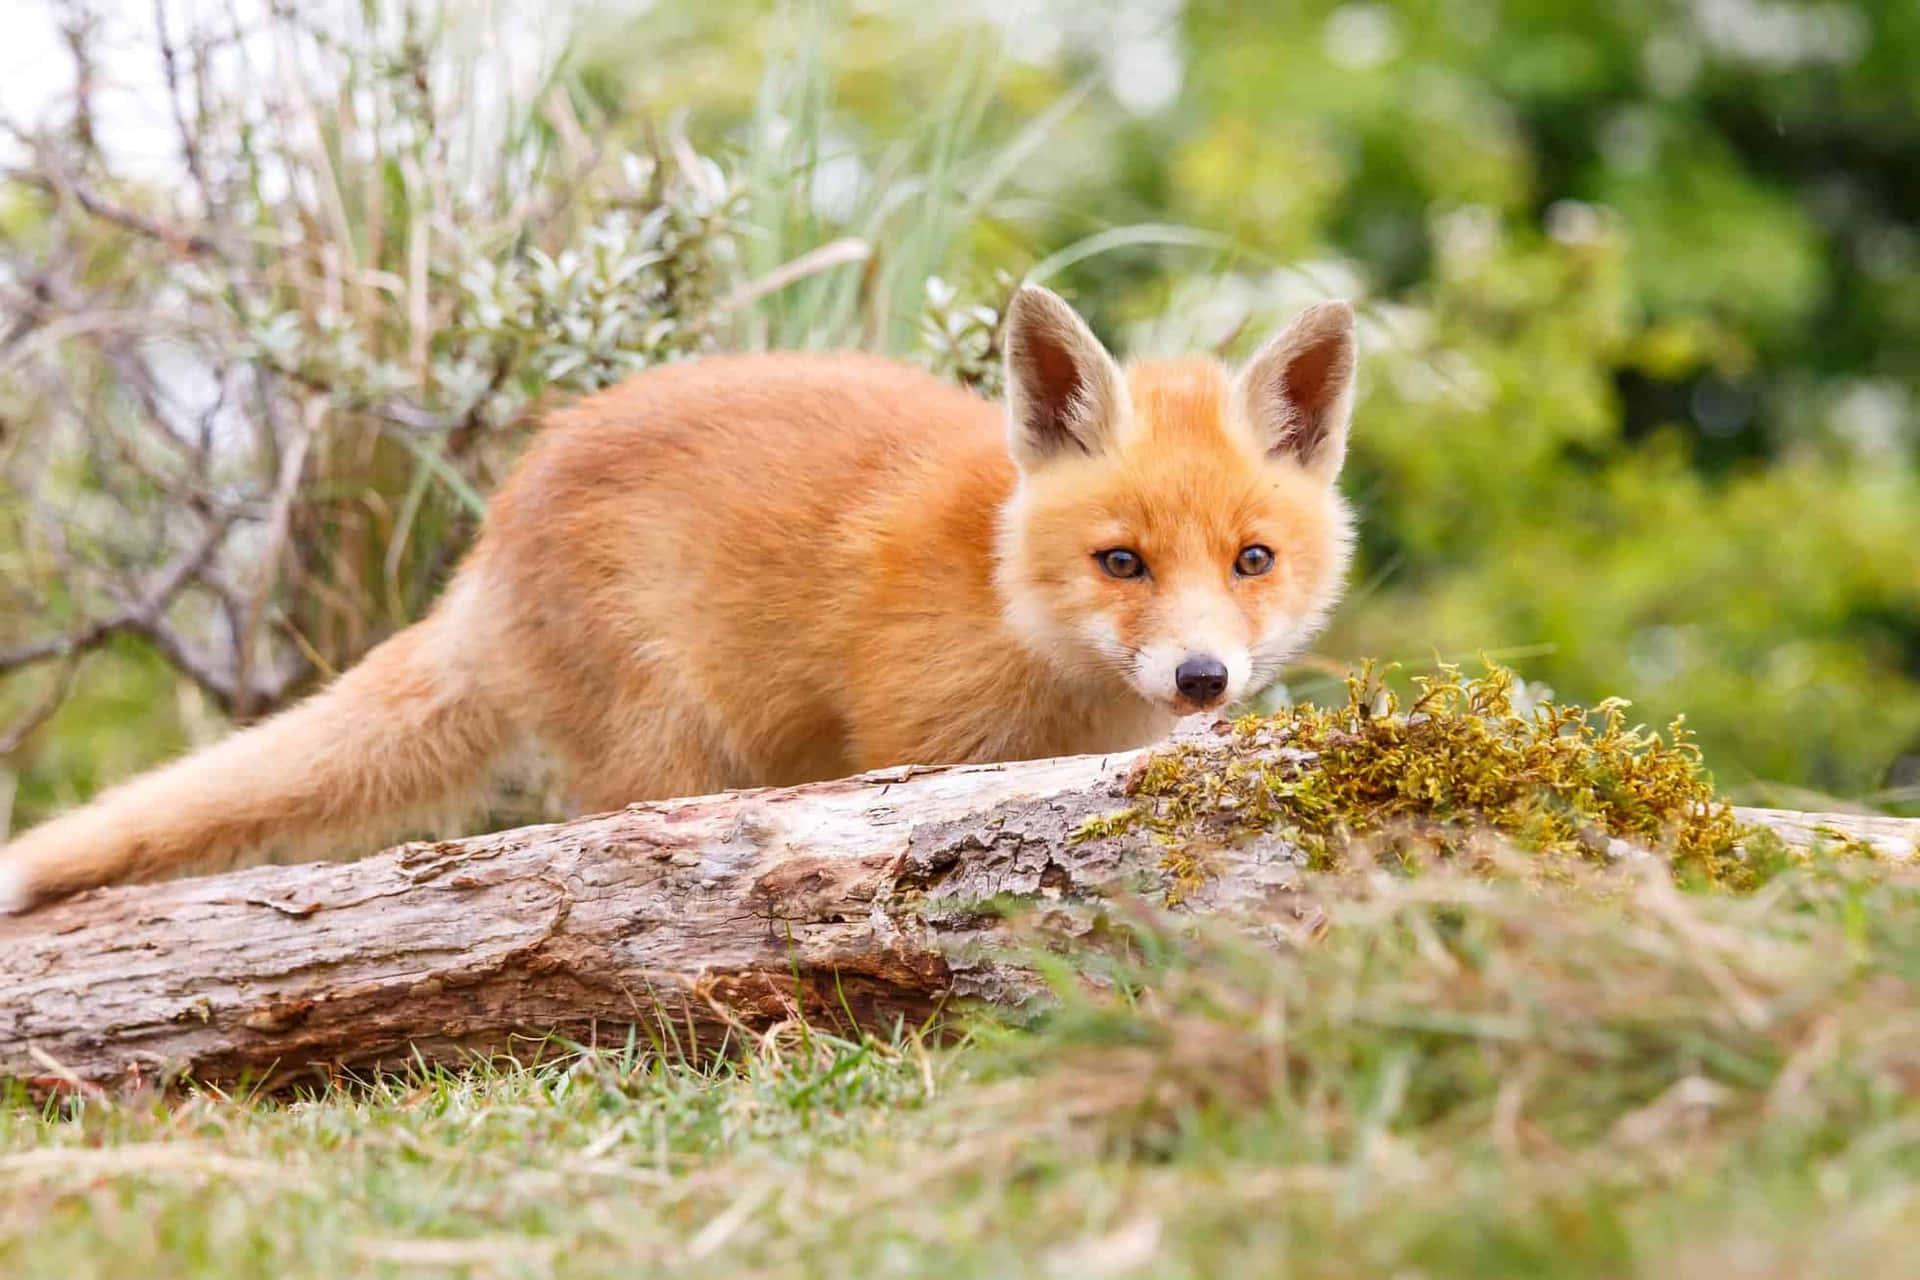 "A curious baby fox sits amongst the shrubbery, looking up inquisitively."